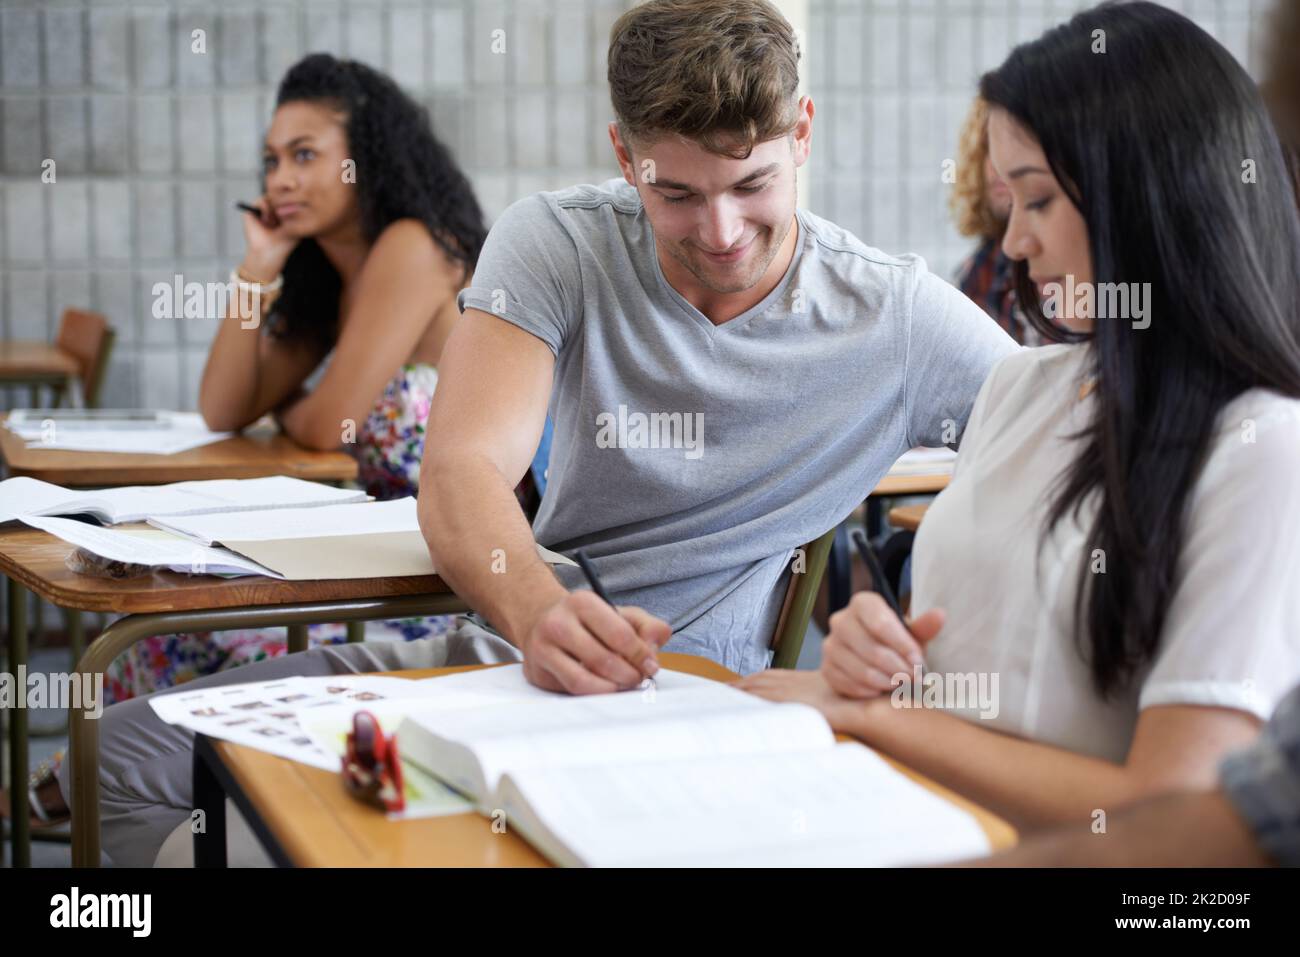 Aiming for an A. Shot of young college students studying in class. Stock Photo